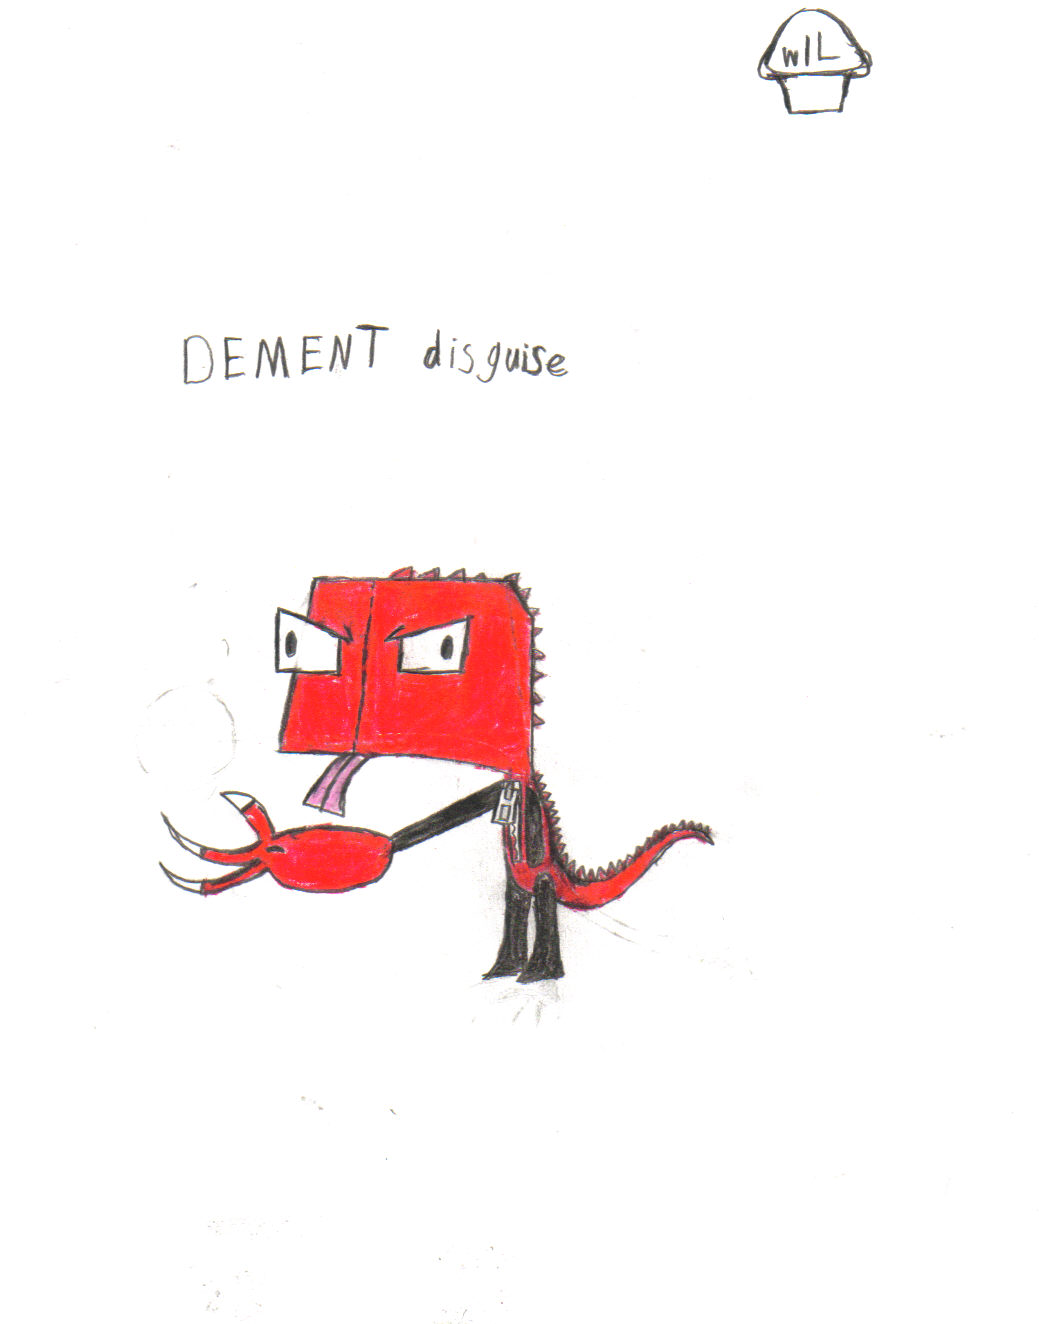 DEMENT in disguise by Geckon_Lord_of_geckos